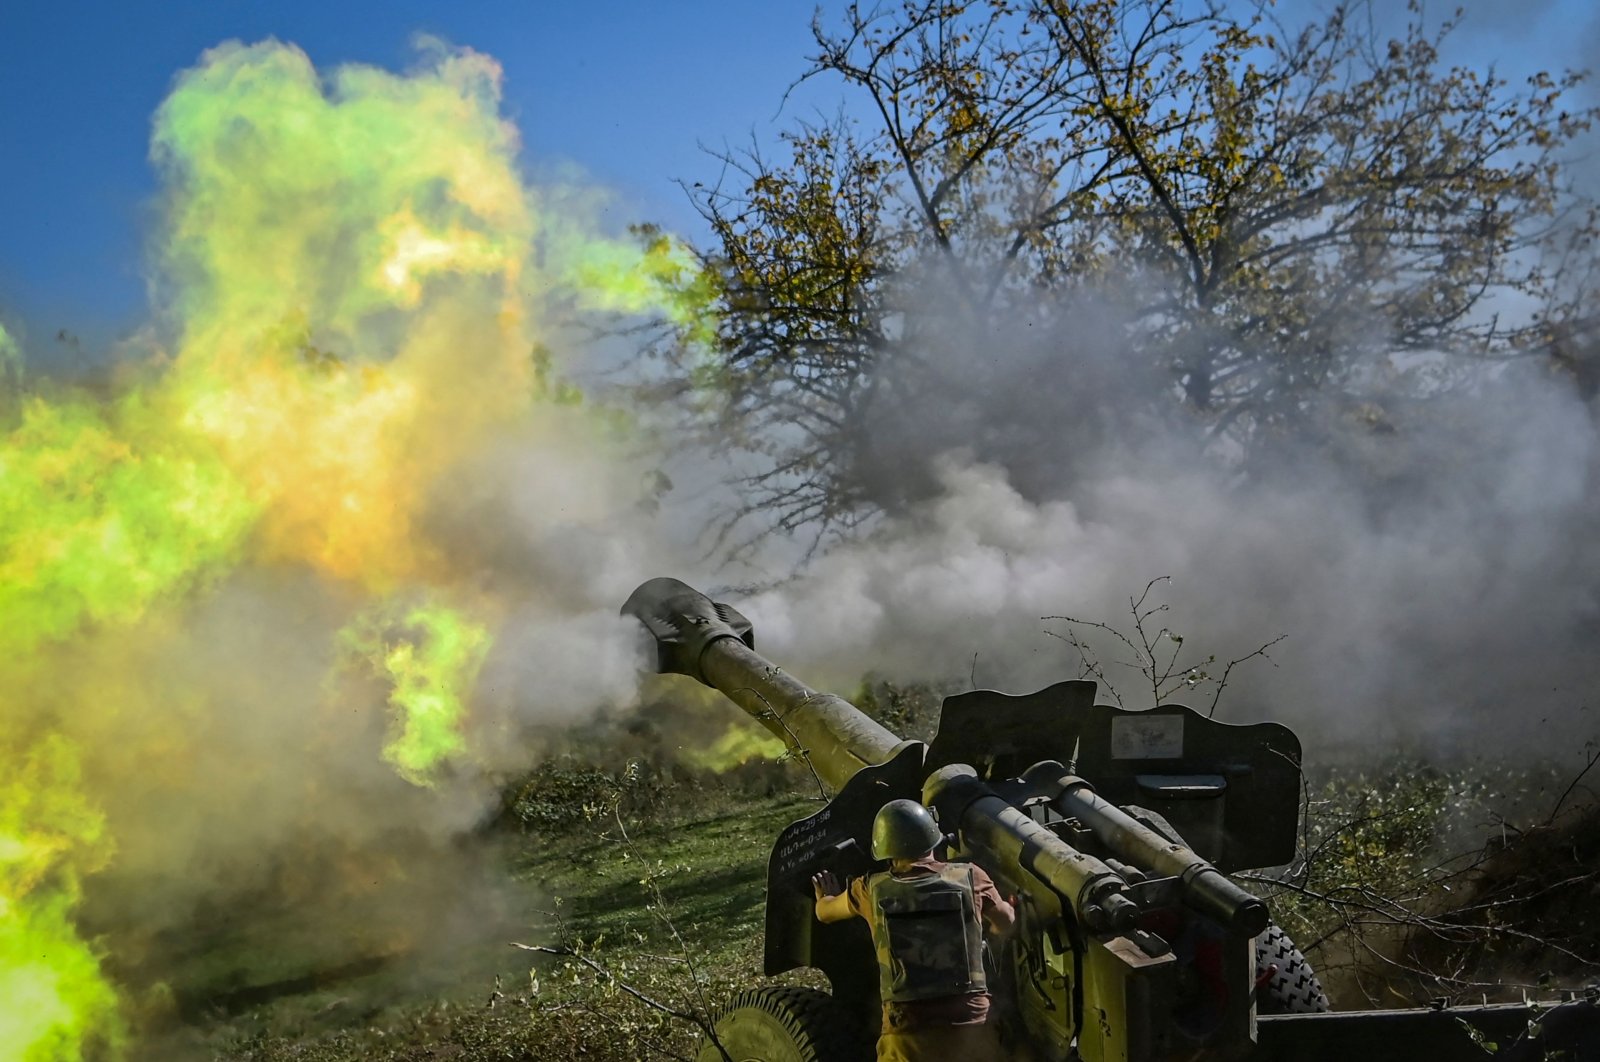 Armenian soldier fires artillery on the front line, during the ongoing fighting between Armenian and Azerbaijani forces over the breakaway region of Nagorno-Karabakh, Azerbaijan, Oct. 25, 2020. (AFP Photo)